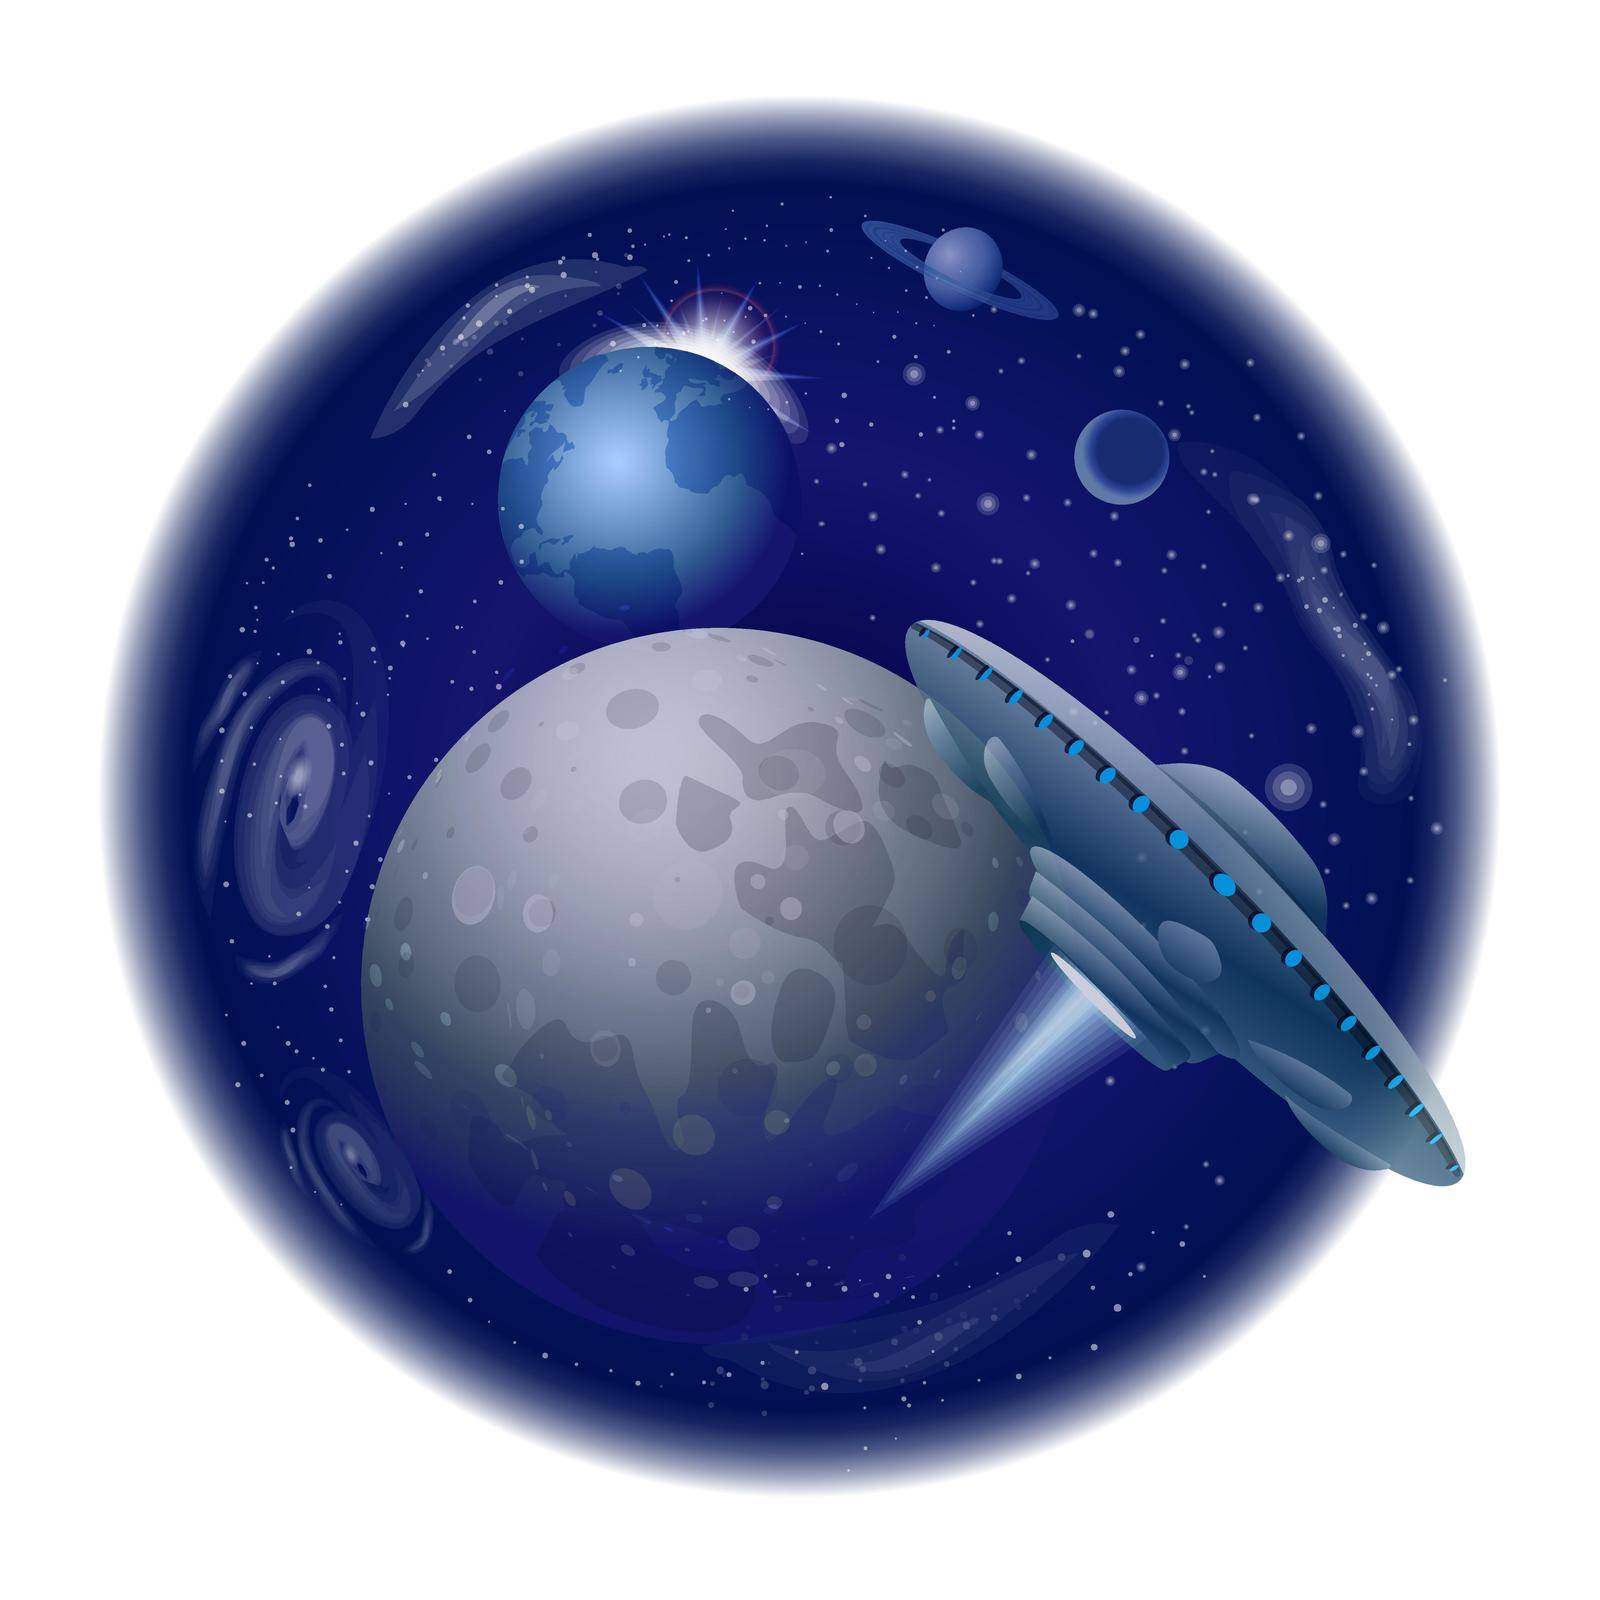 Concept illustration of ufo flight around the moon and space.